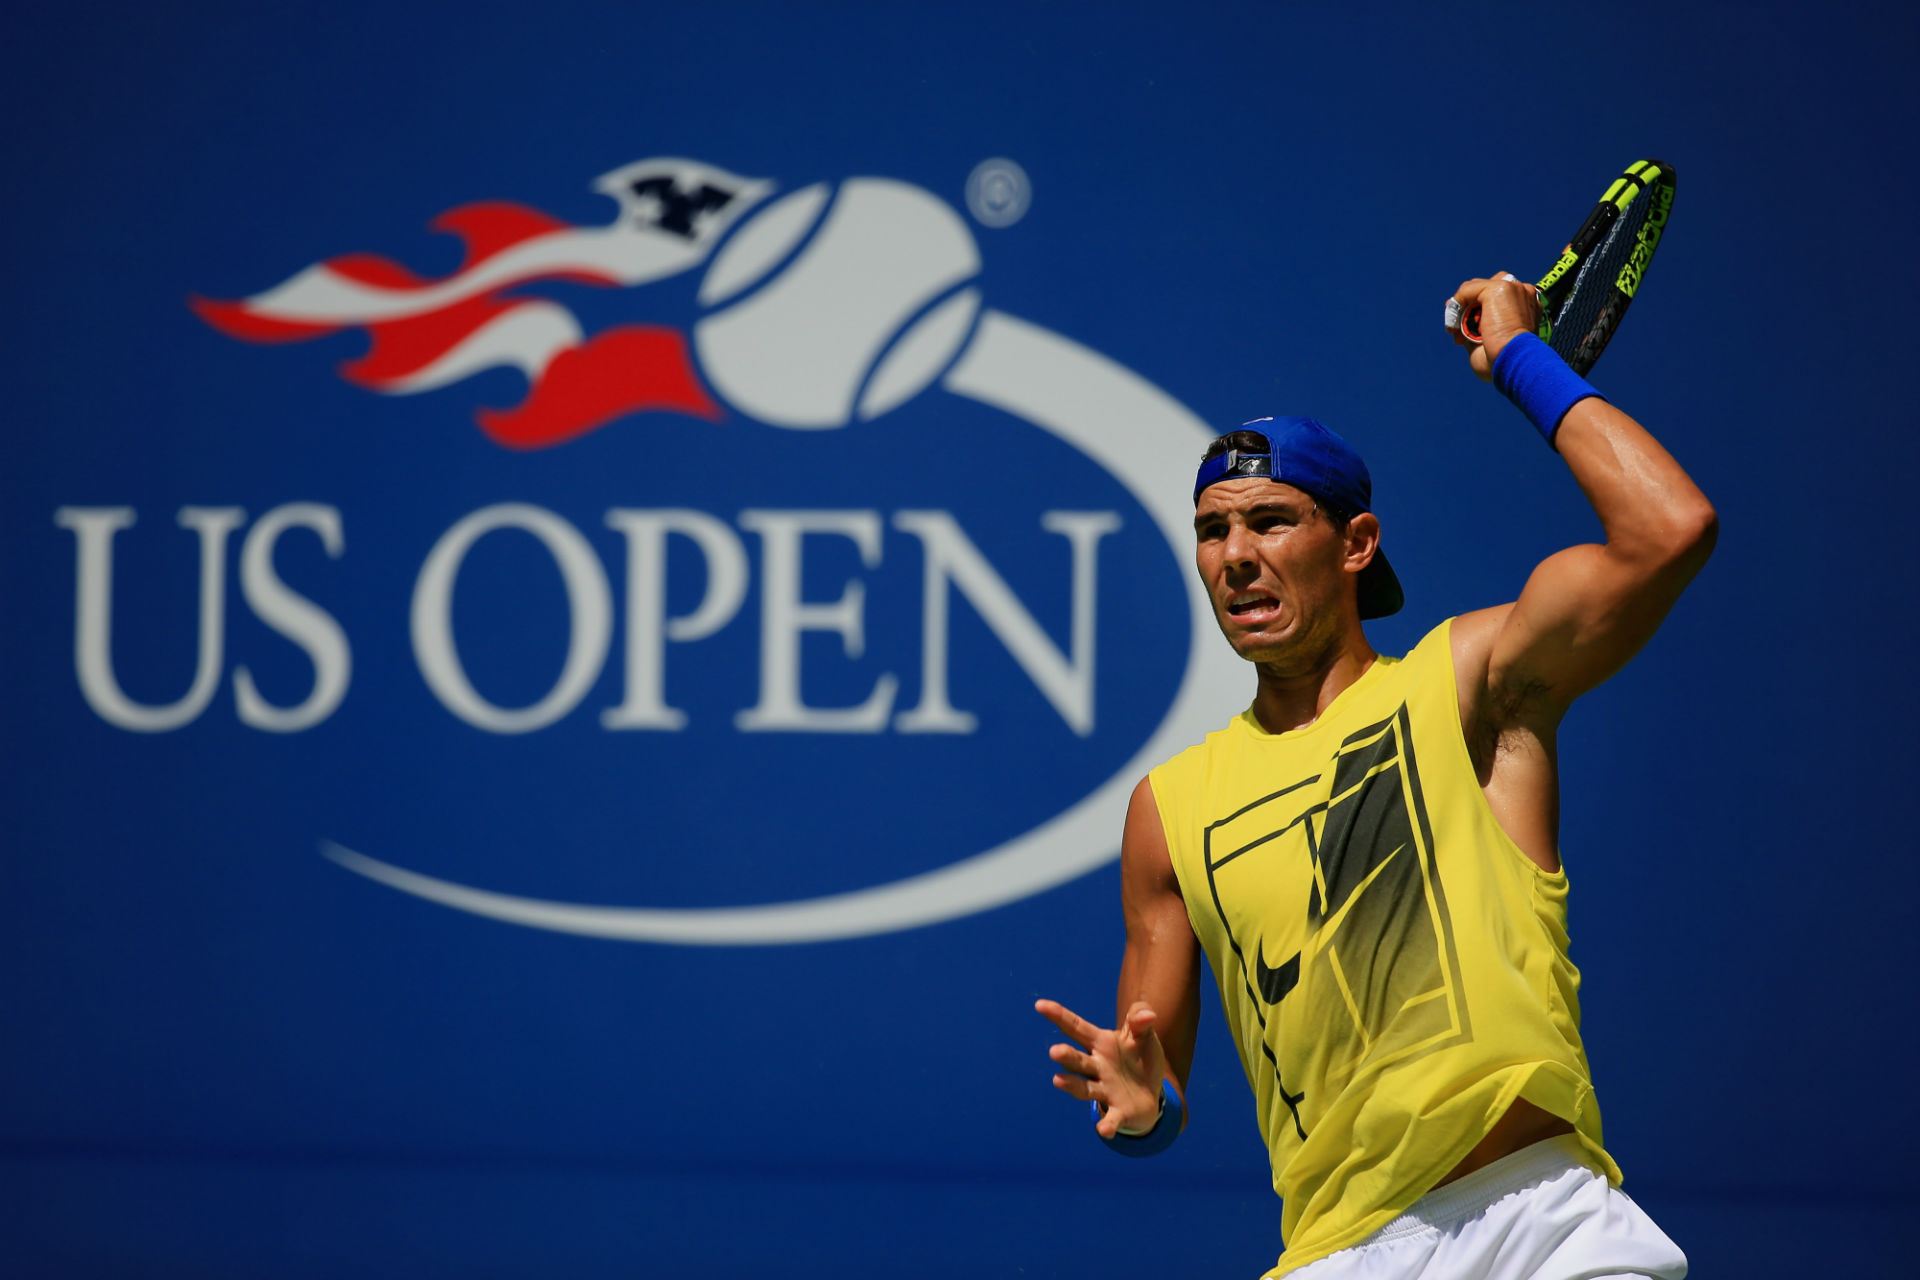 us open tennis results